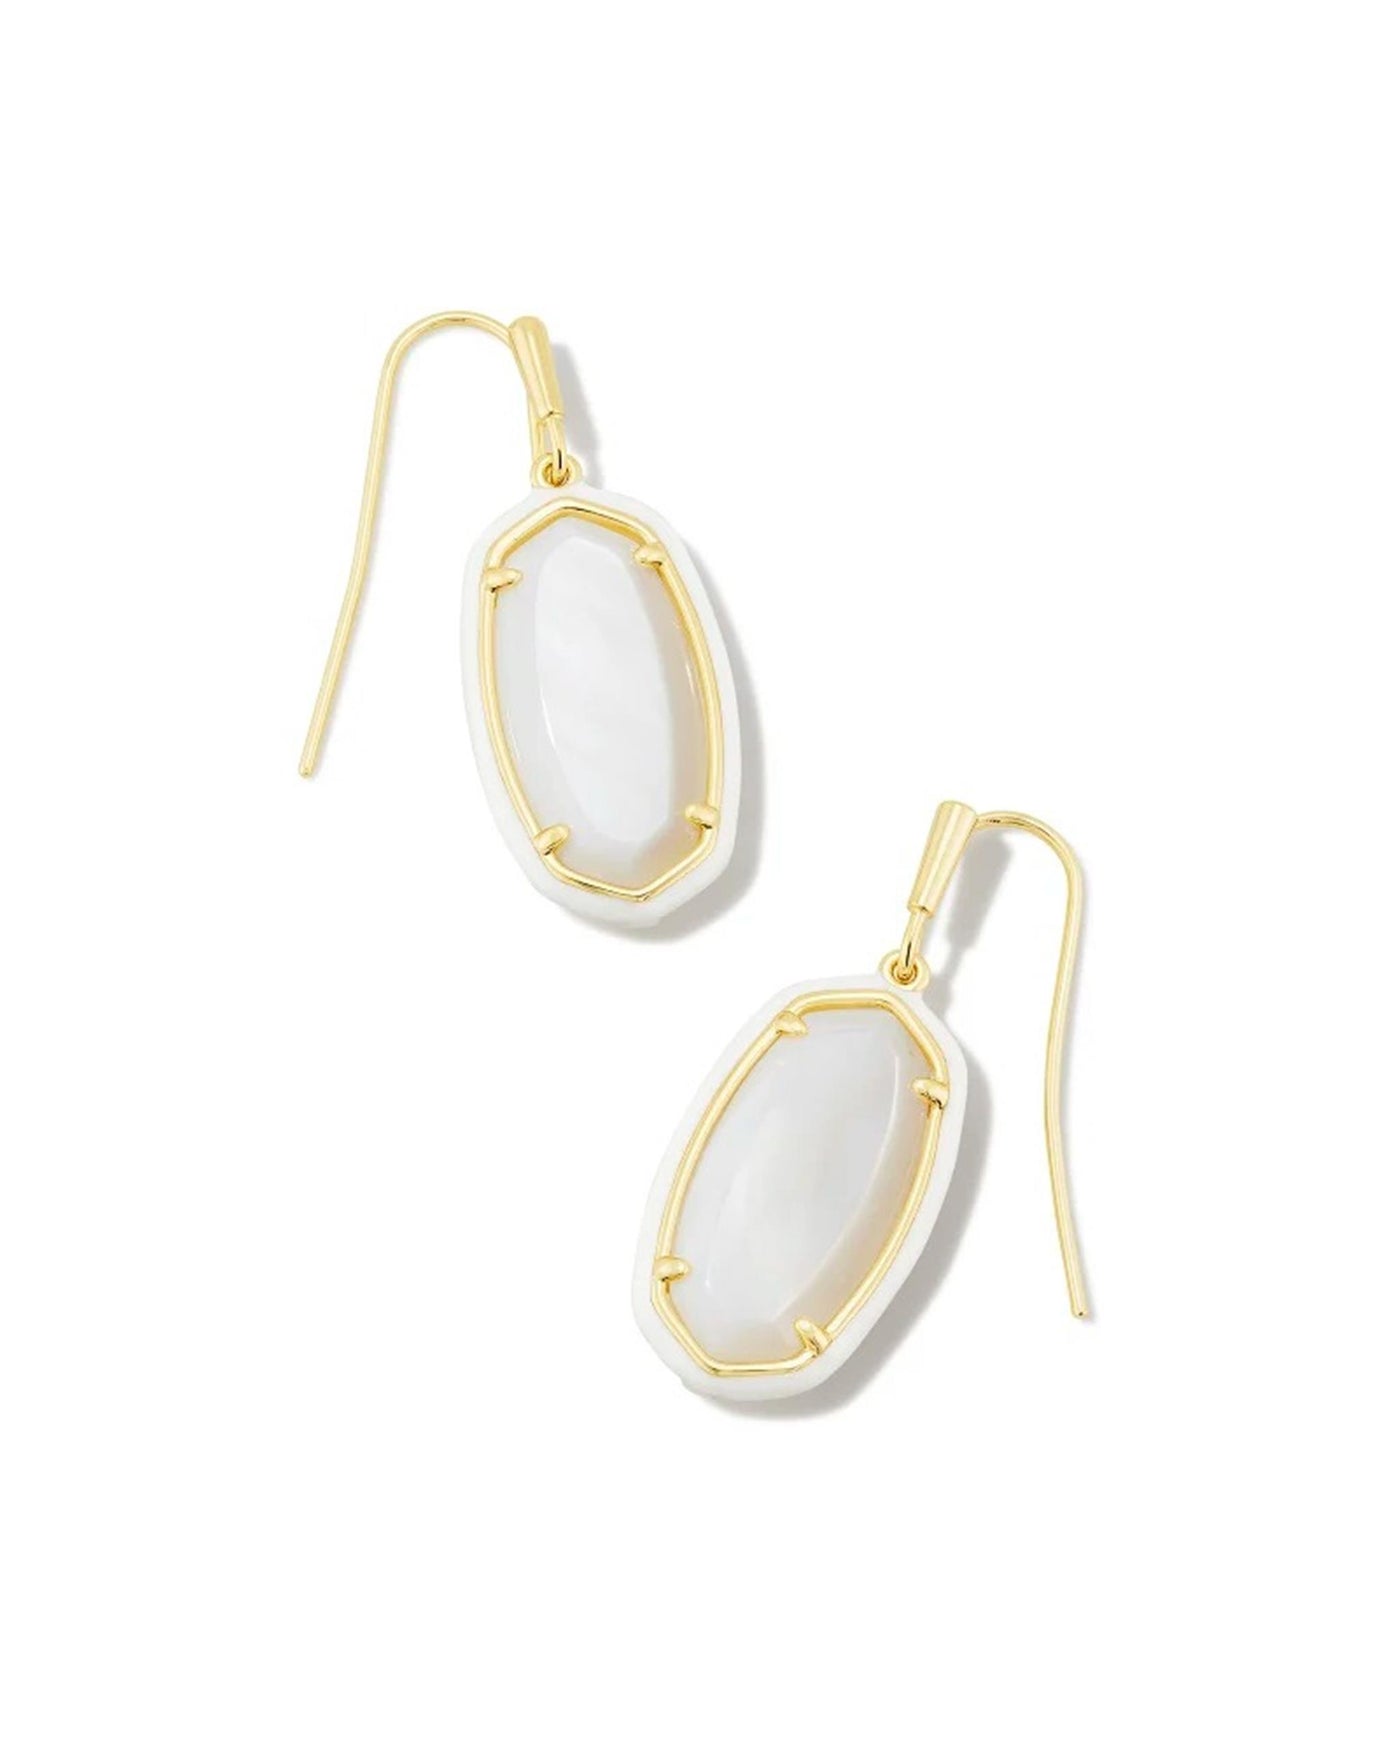 Gold Tone Earrings Featuring White Mother of Pearl by Kendra Scott